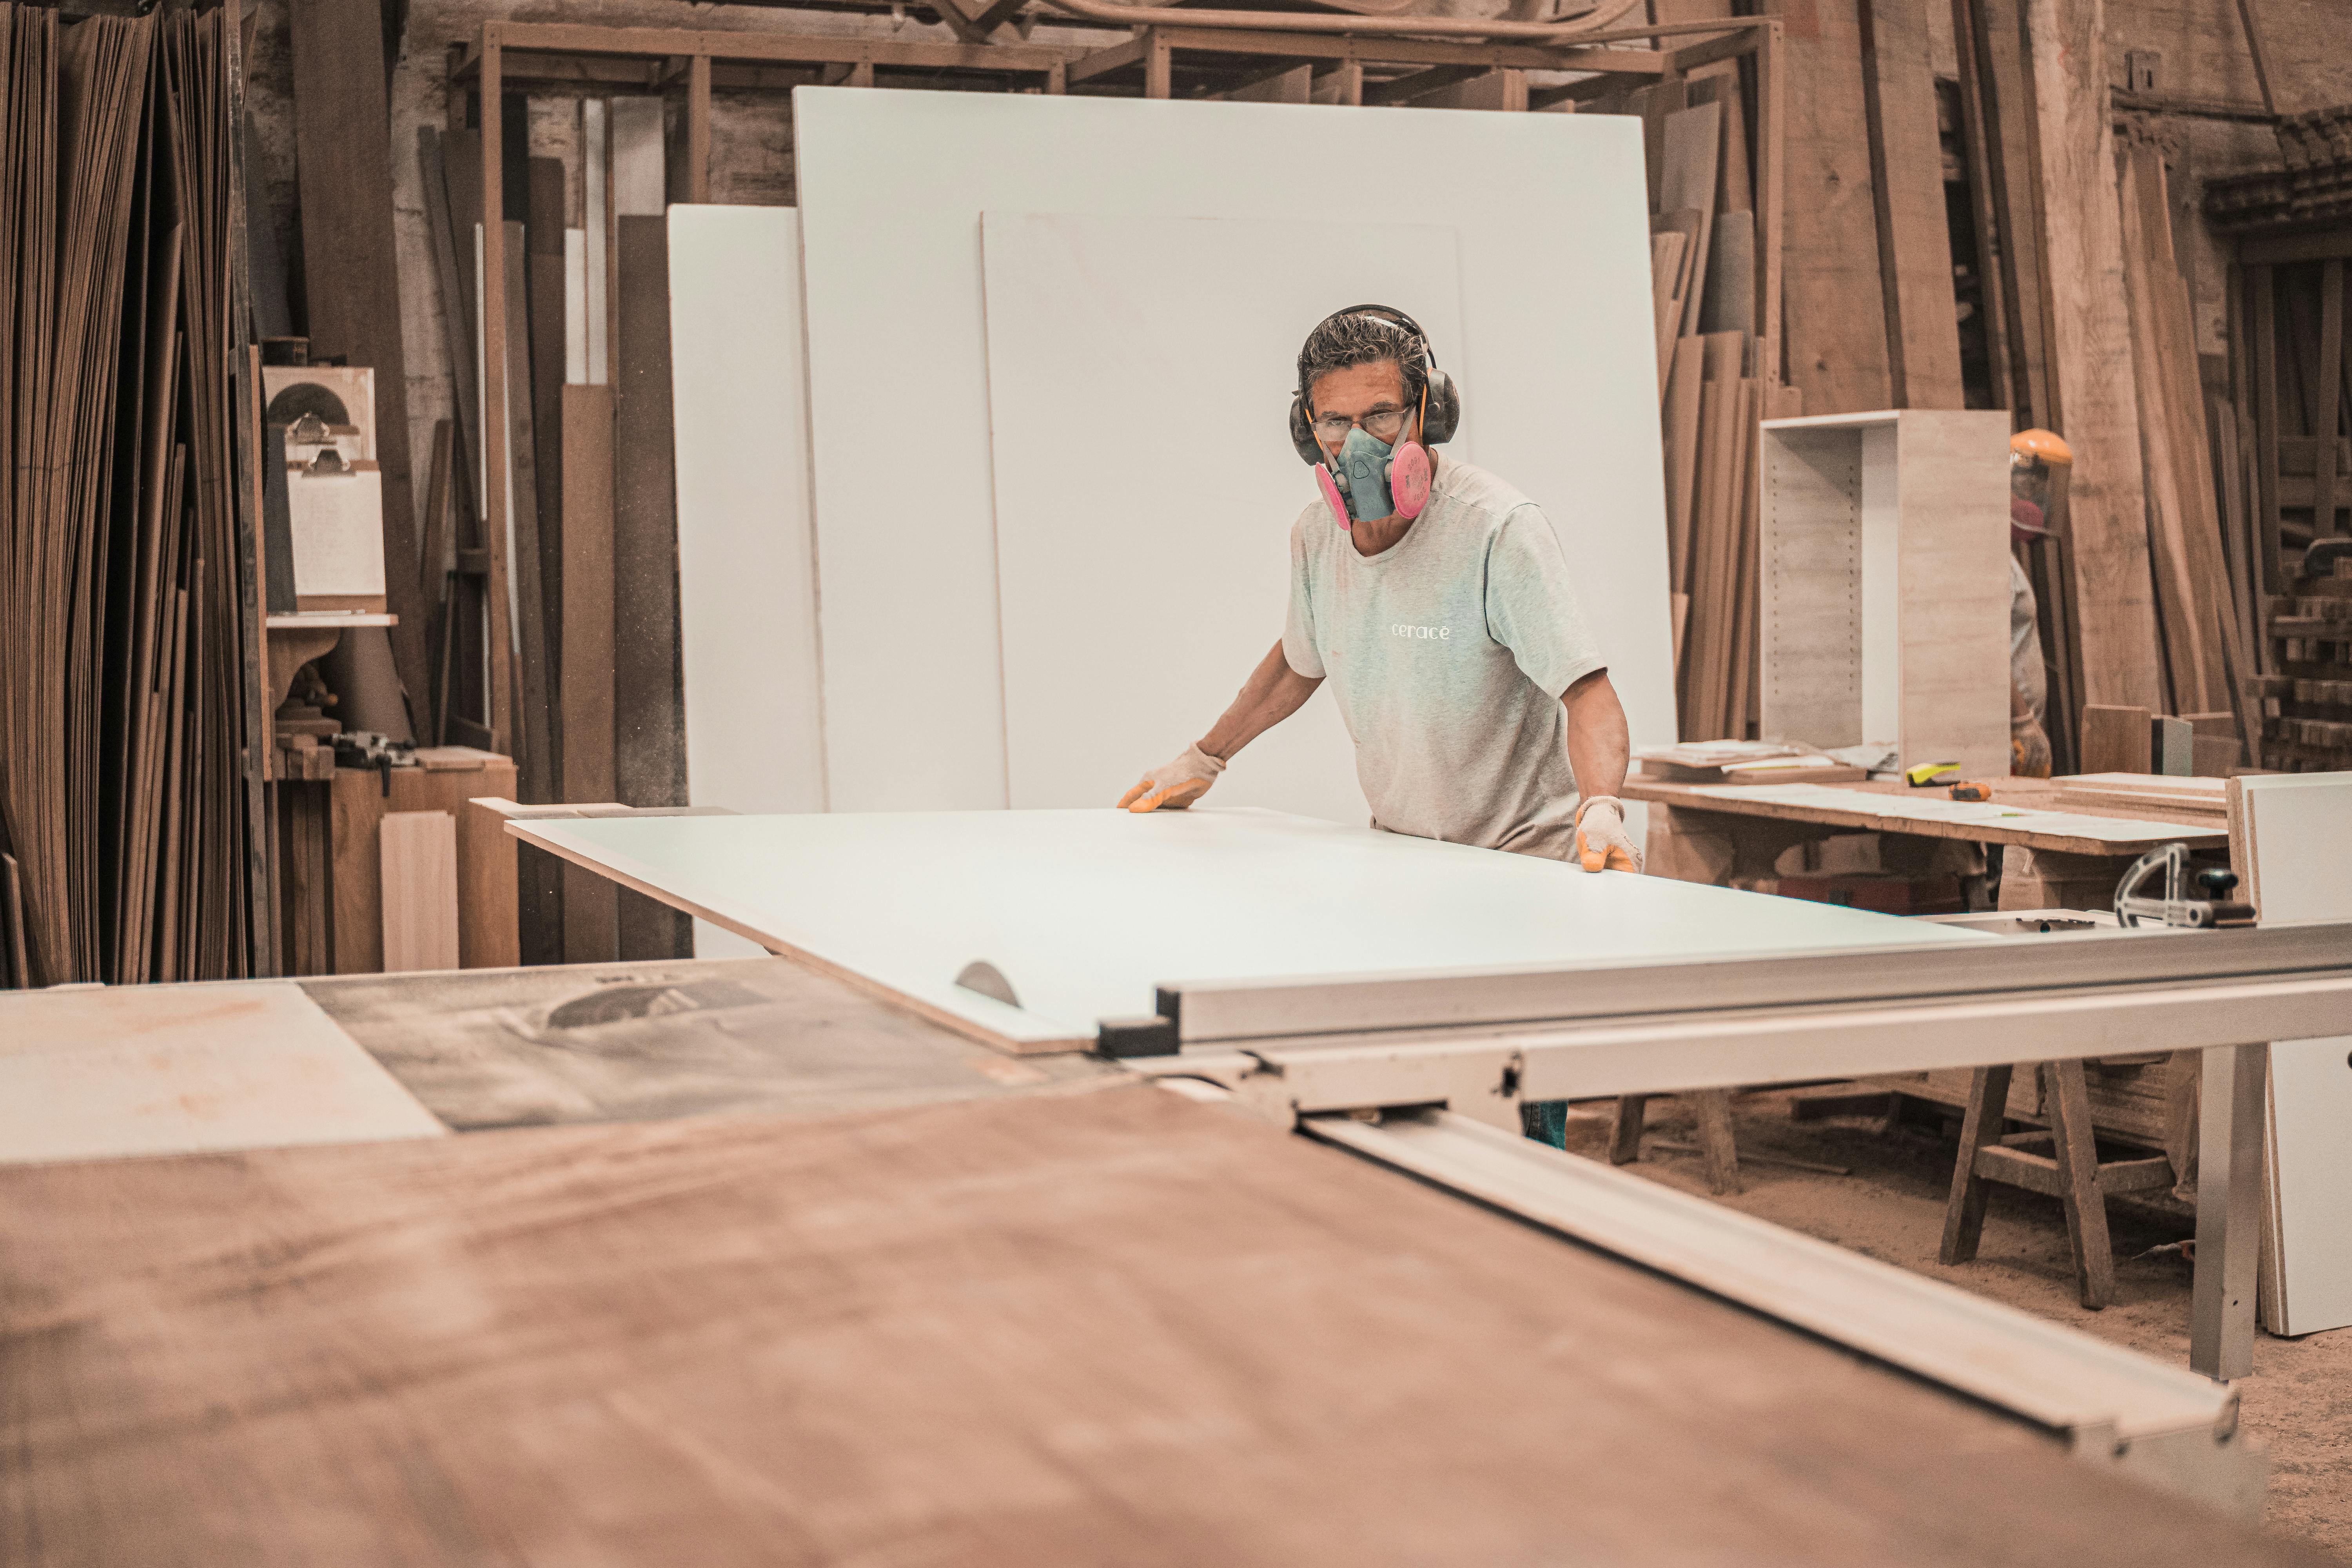 Man working on a wooden board. | Photo: Pexels